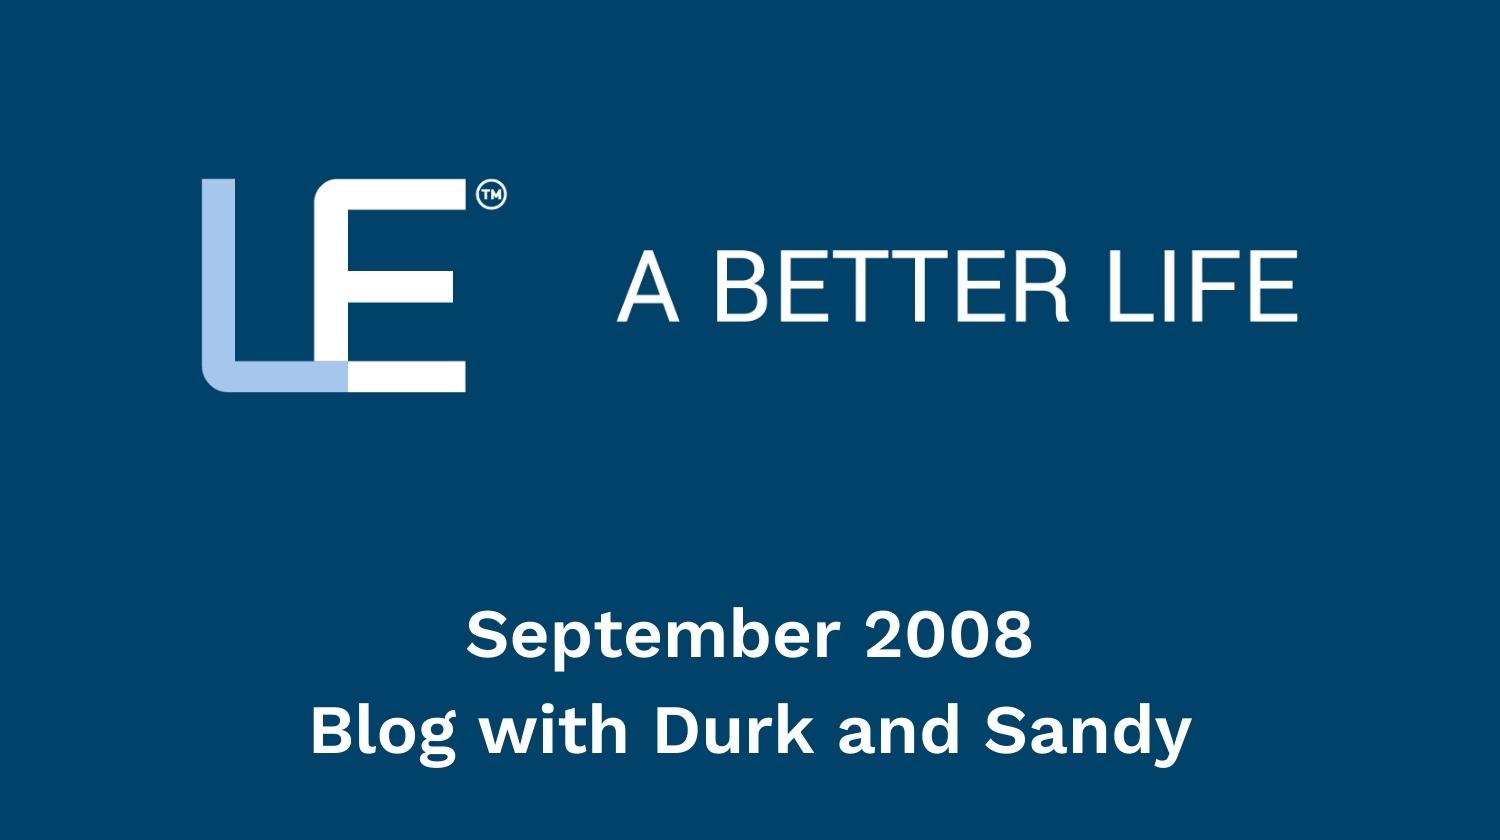 September 2008 Blog with Durk and Sandy